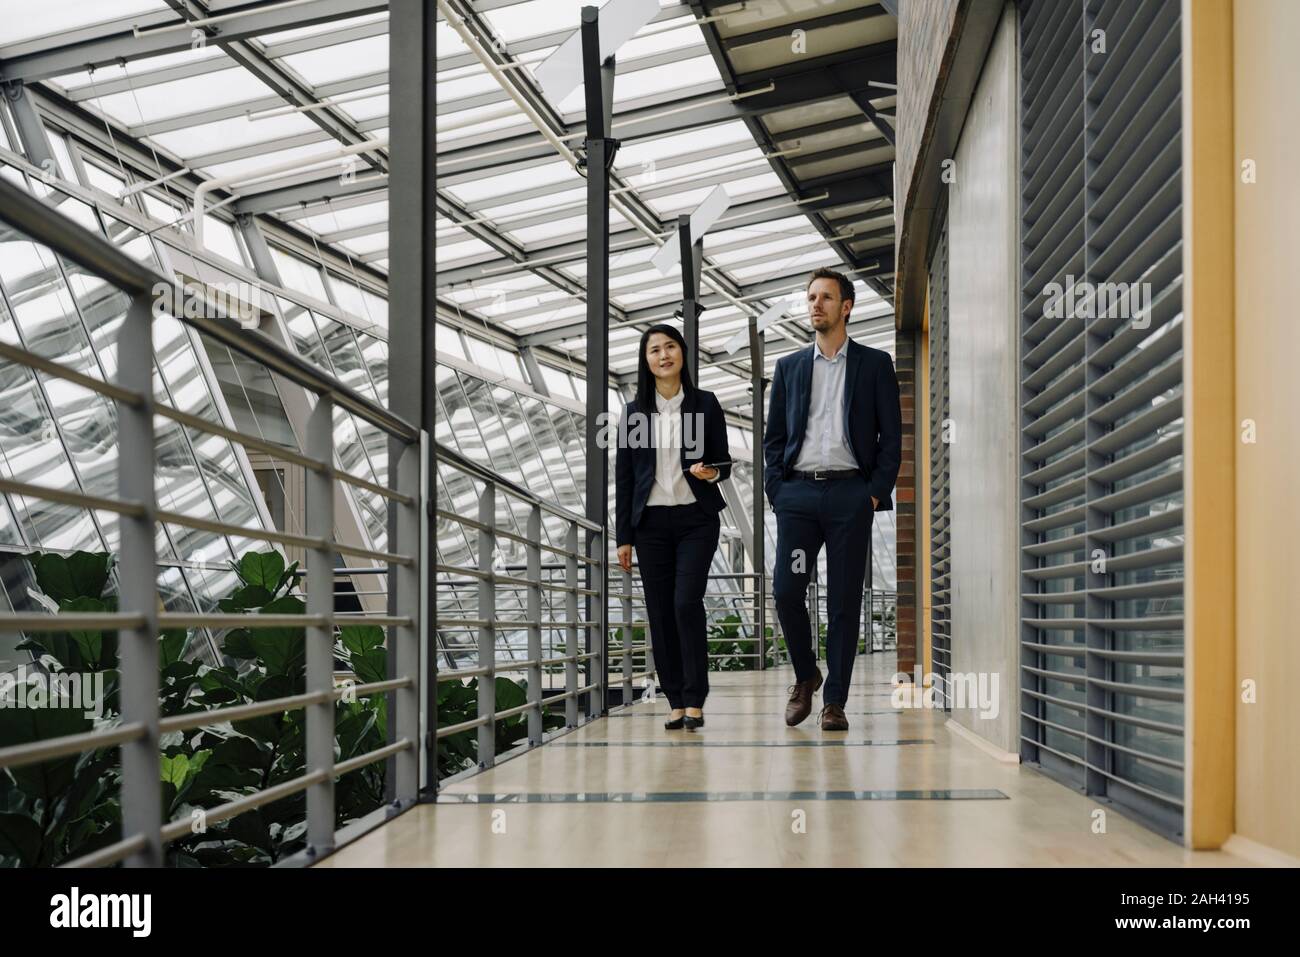 Businessman and businesswoman walking in modern office building Stock Photo